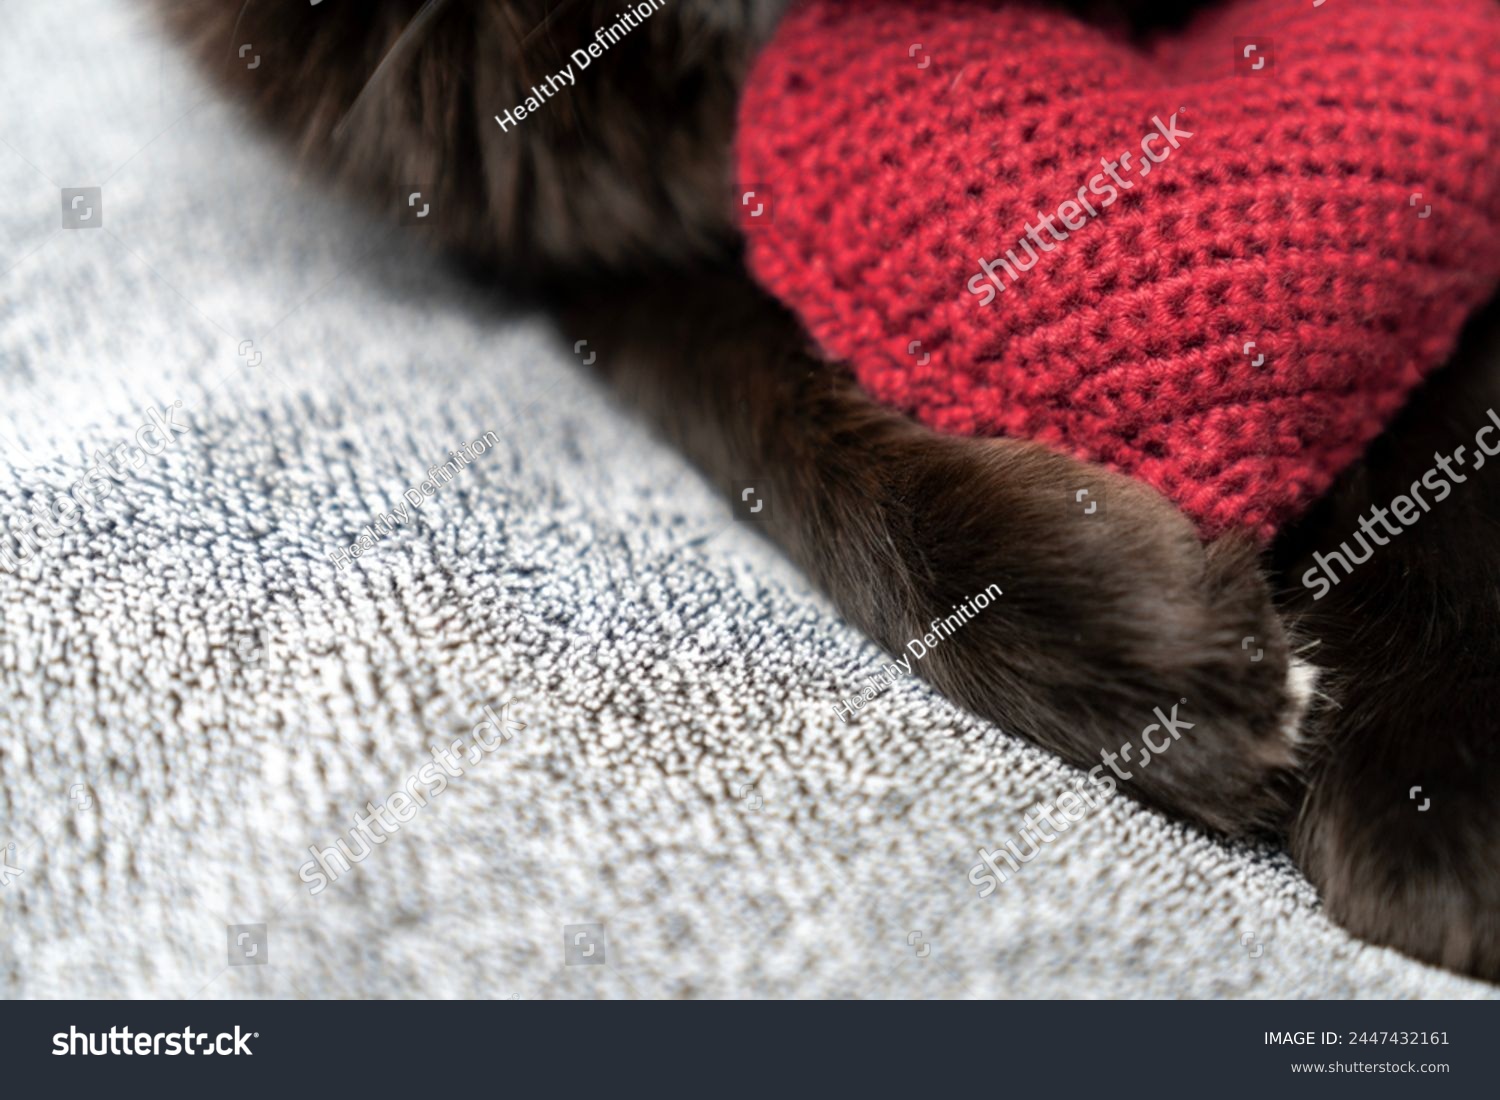 Red knitted heart in the paws of a cat. a gray and black fluffy cat for Valentine's Day or postcard. Textured background with a cat. copy space. valentine's day, lovers day, love concept #2447432161